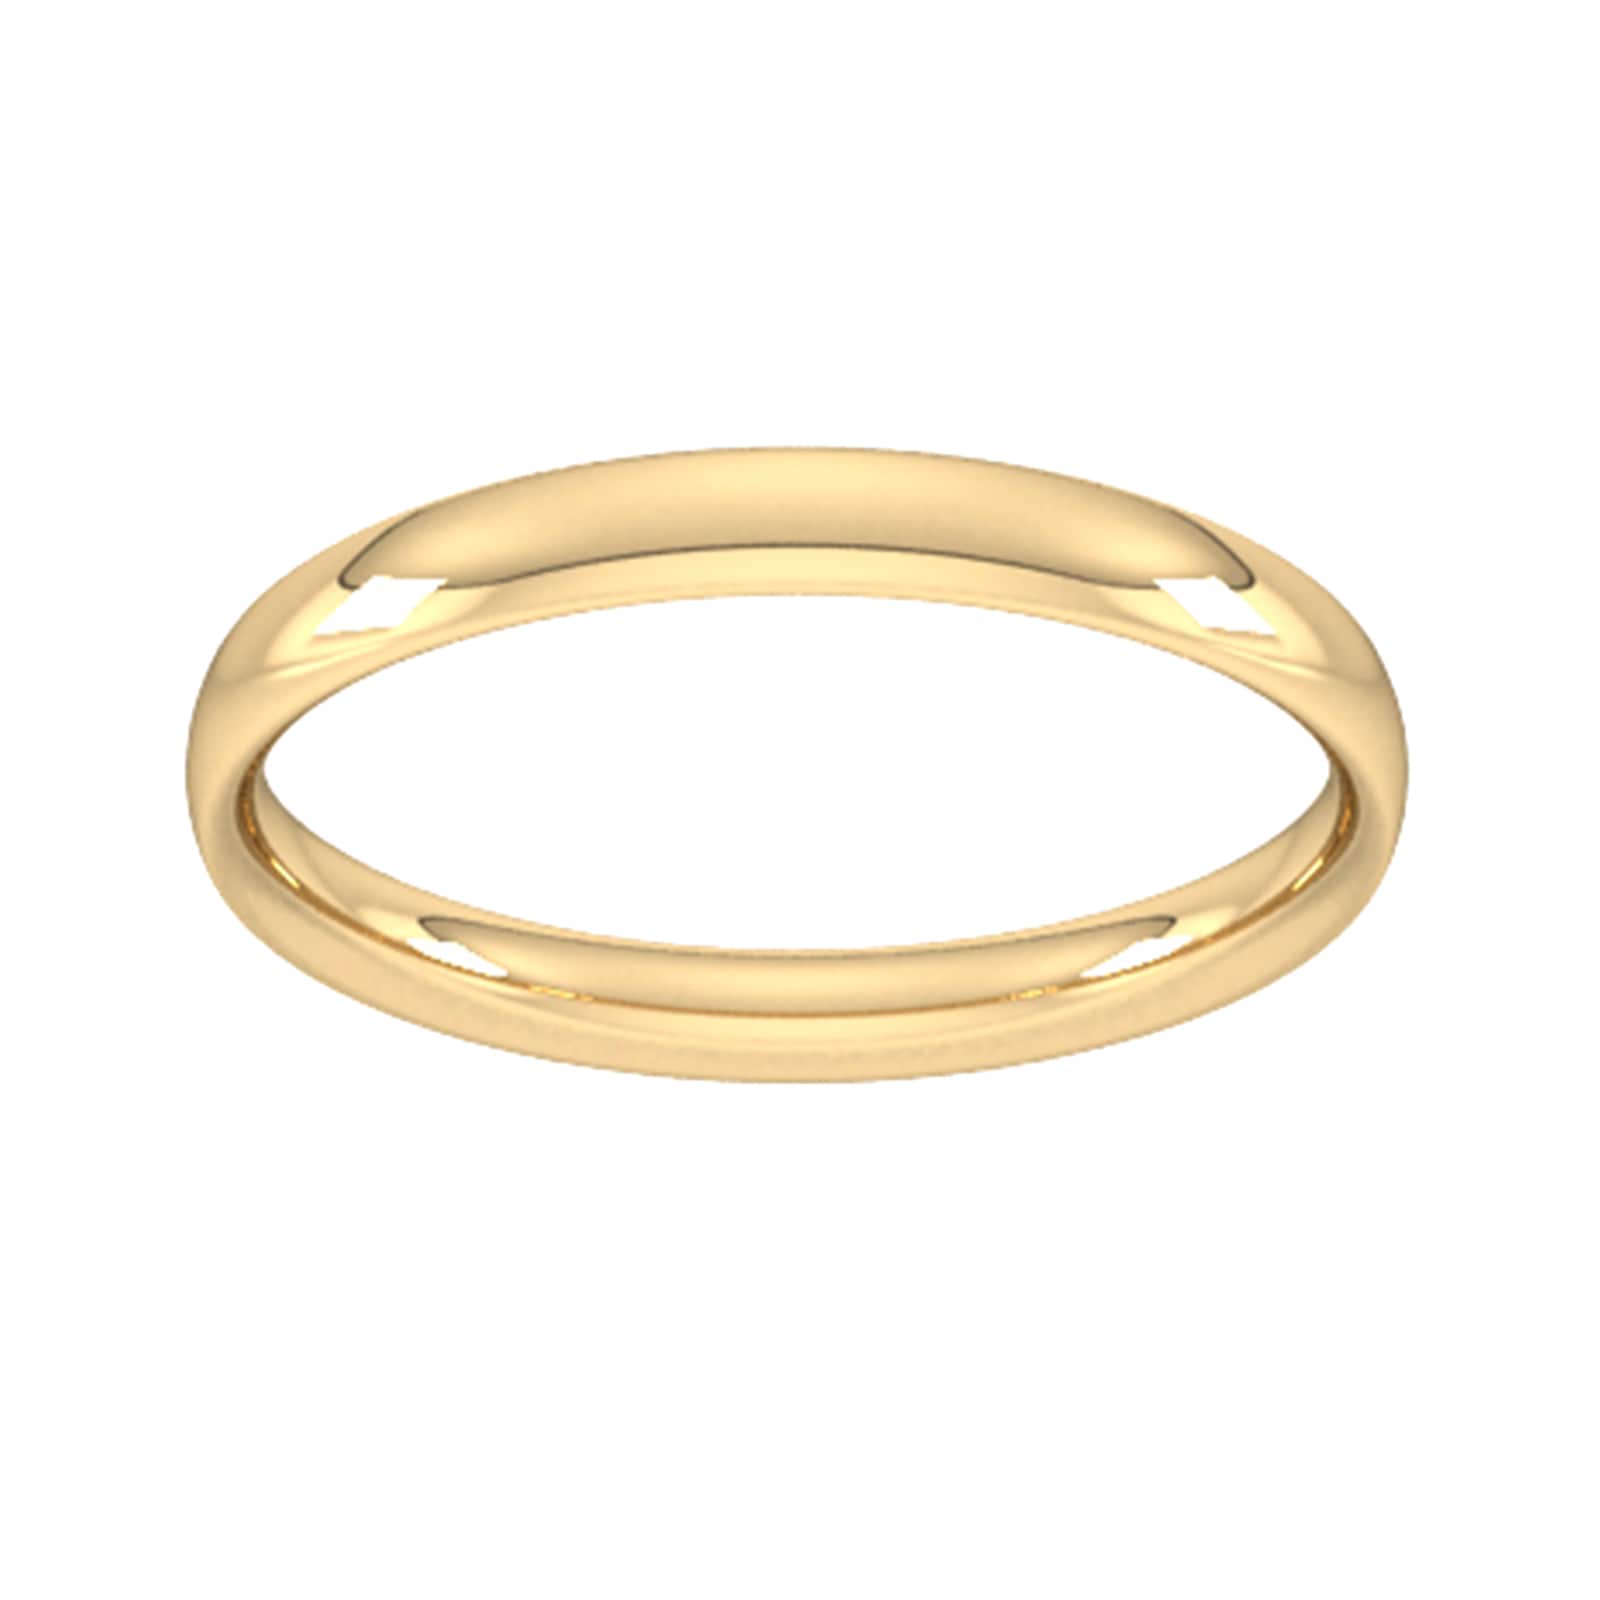 2.5mm Traditional Court Standard Wedding Ring In 18 Carat Yellow Gold - Ring Size Q